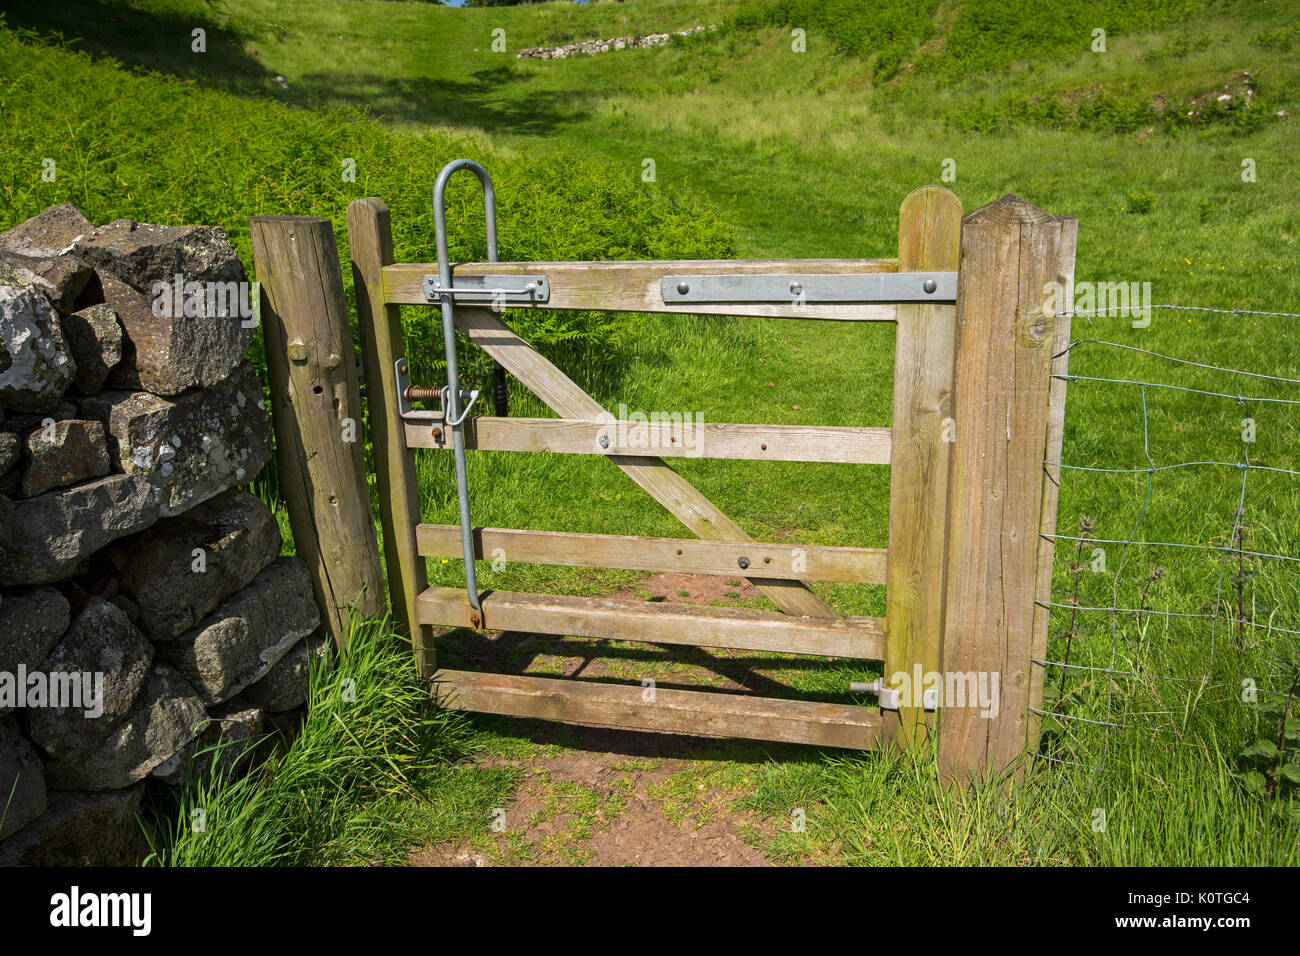 Wooden gate with automatic closing mechism on British walking track / public footpath Stock Photo